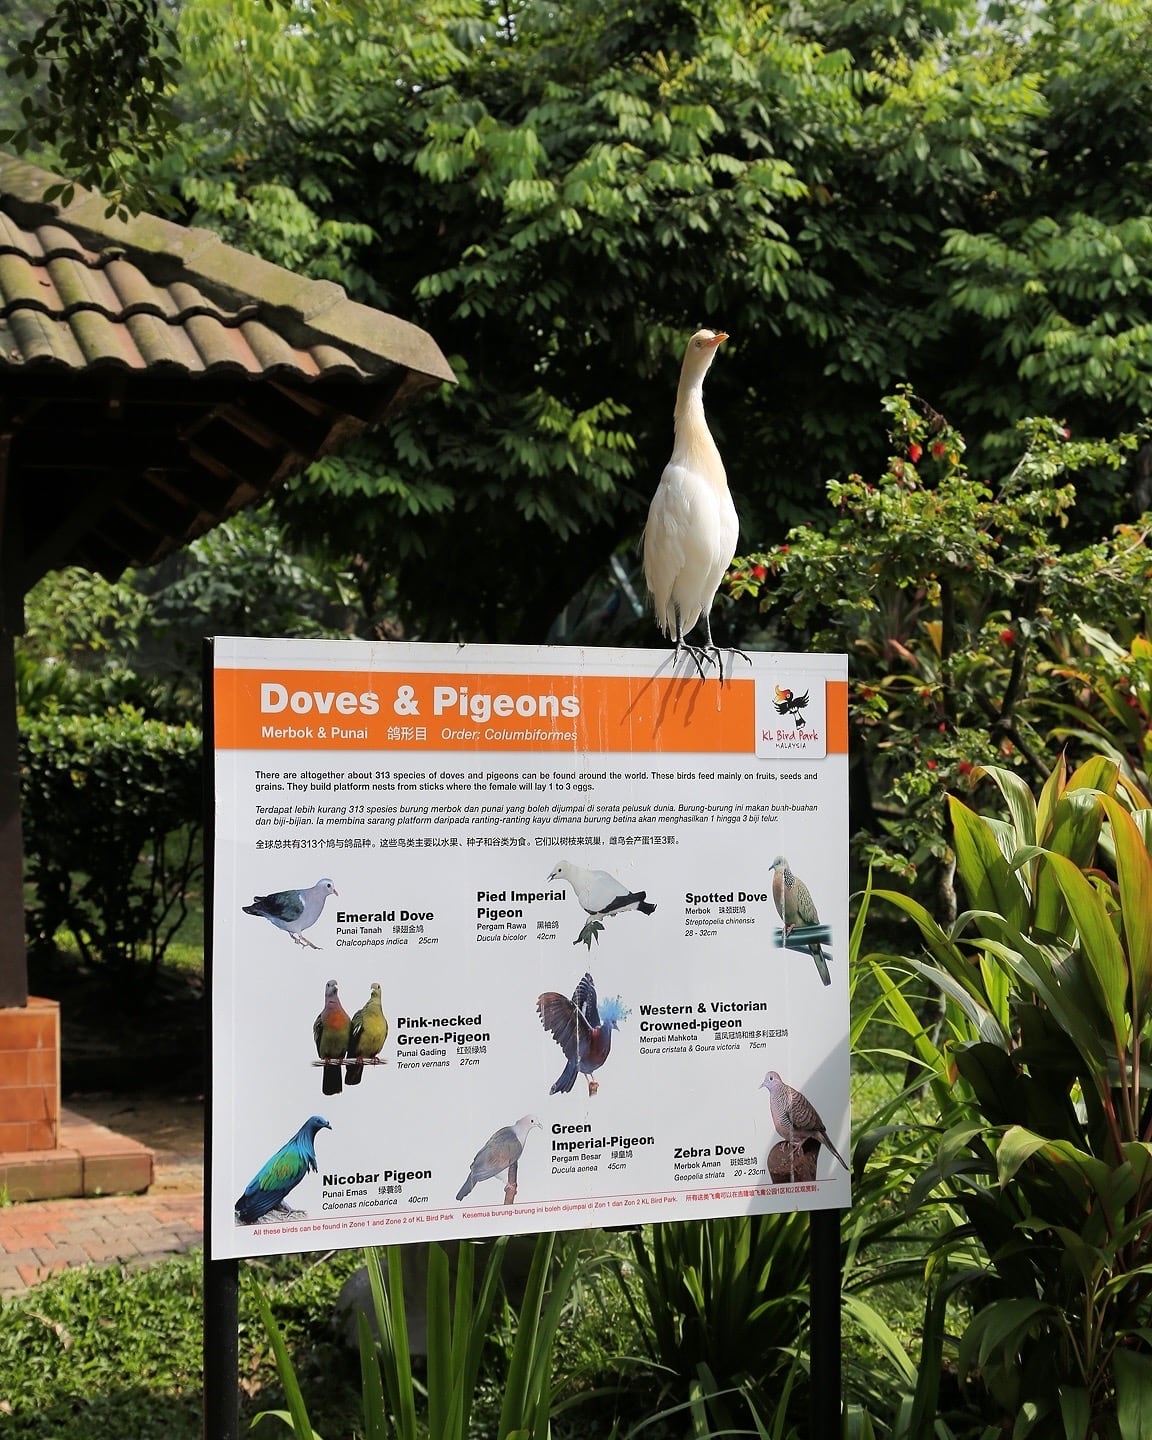 doves and pigeons sign kl bird park